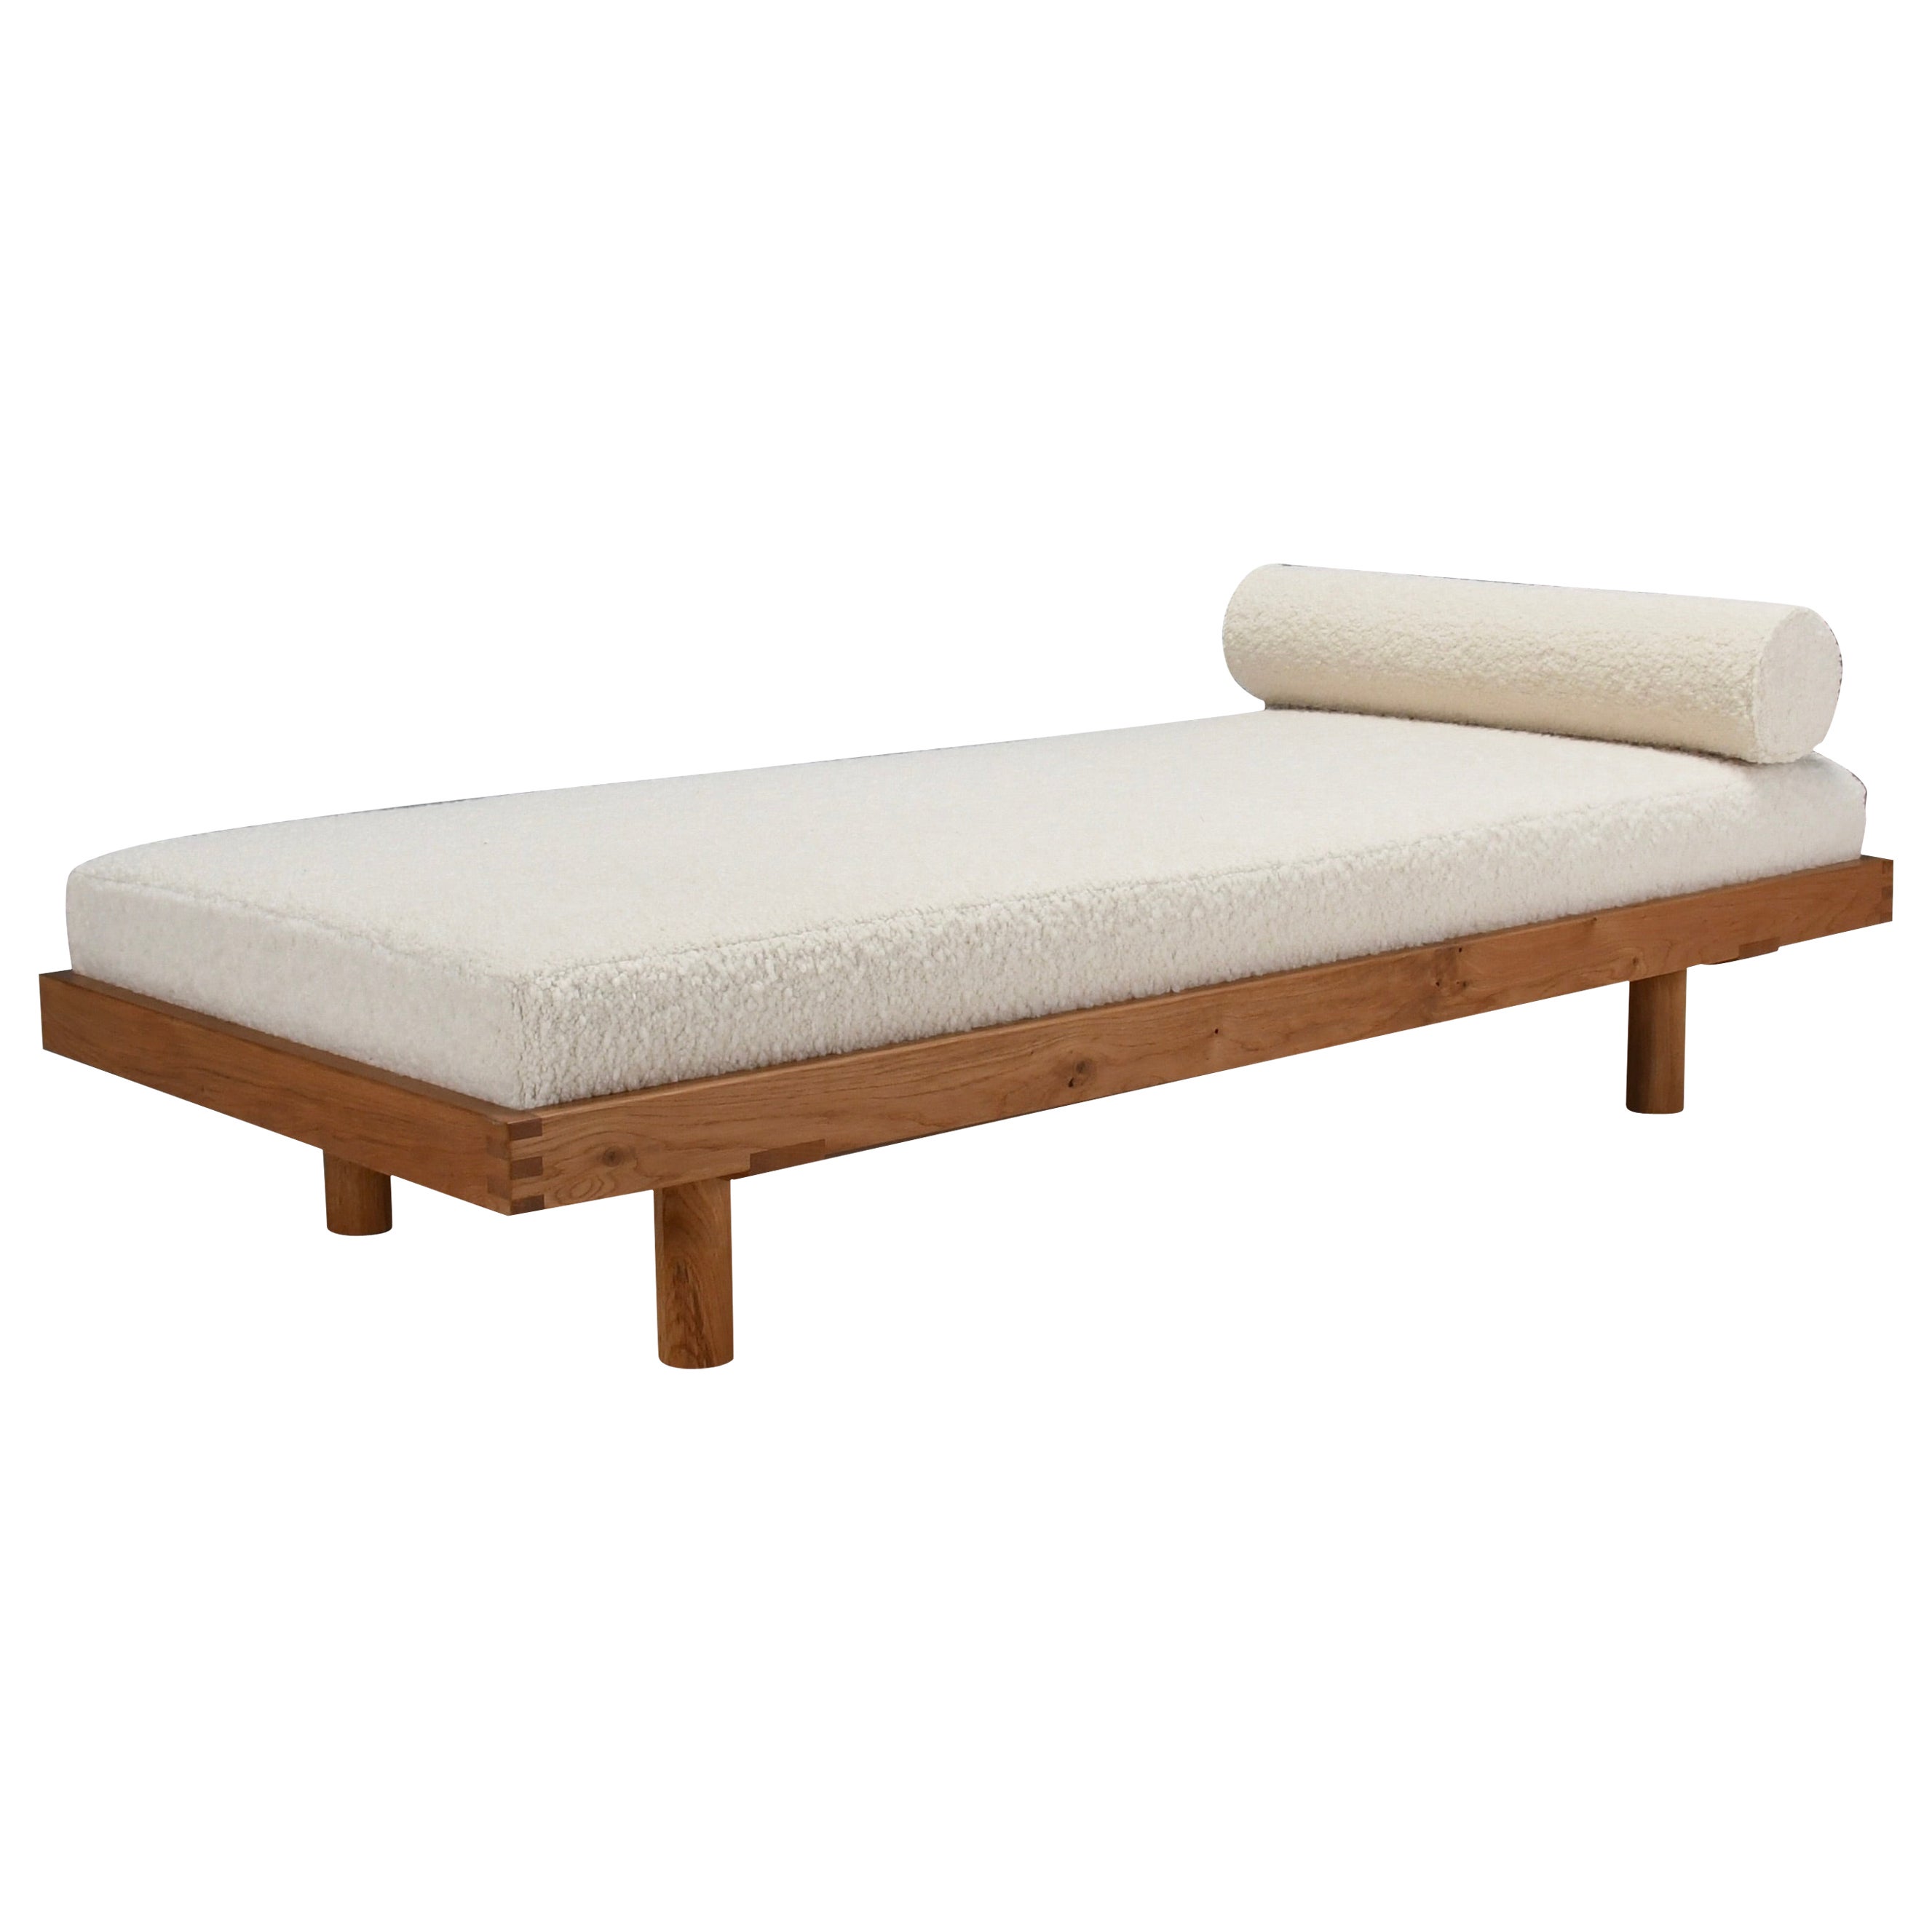 Pierre Chapo ‘Godot’ Daybed, France, 1965 For Sale